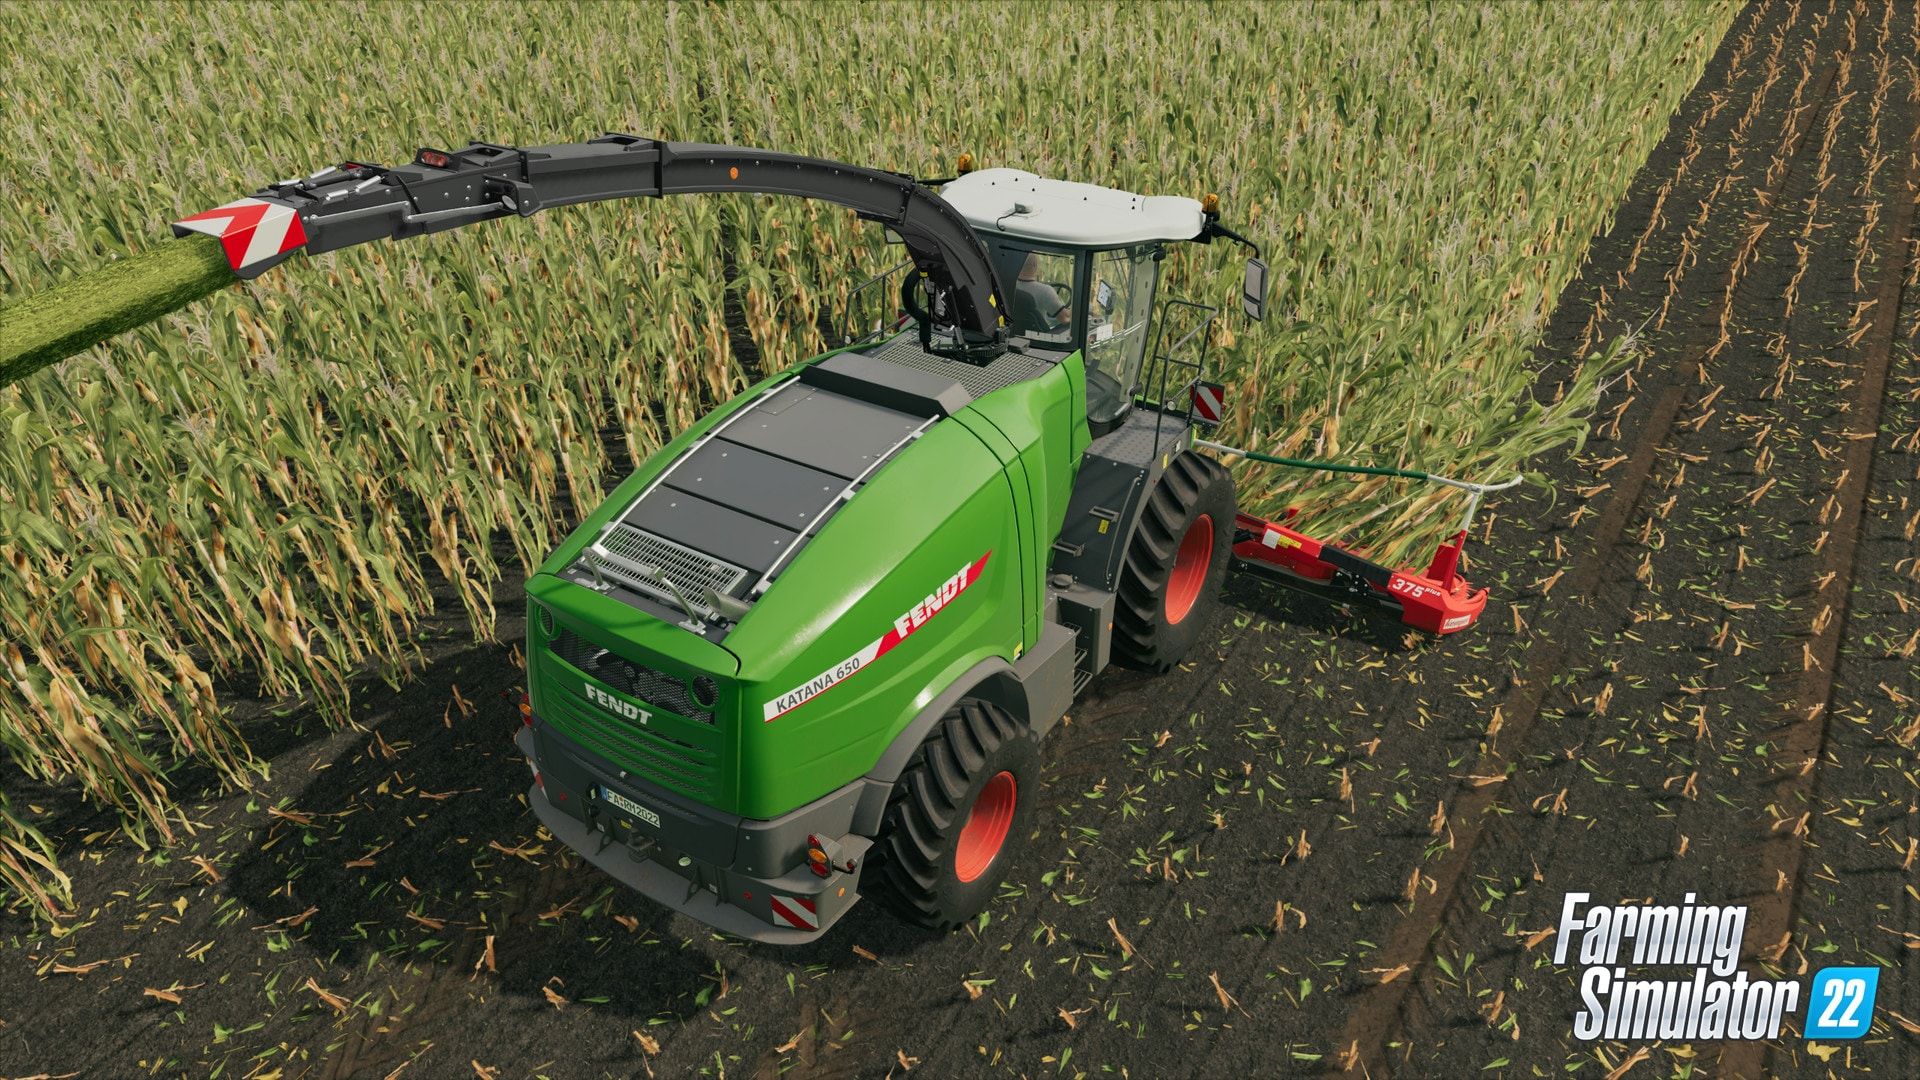 Farming Simulator 22 Money Cheat: Get unlimited cash on PC, PS4, PS5, Xbox  One, and Xbox Series X